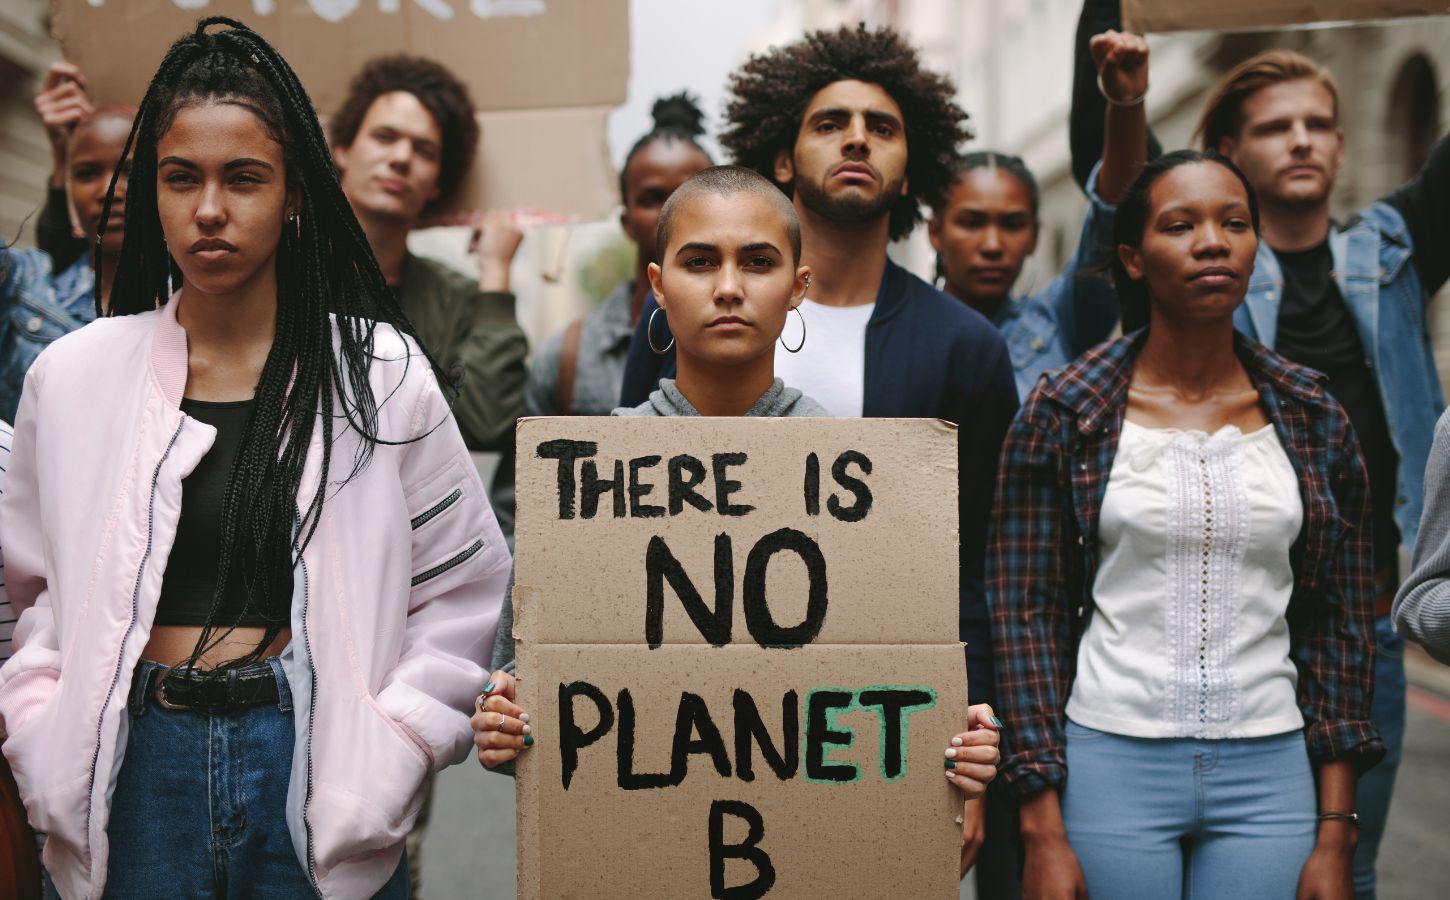 Environmental protestors standing still - one holds a sign reading "There is no planet B"